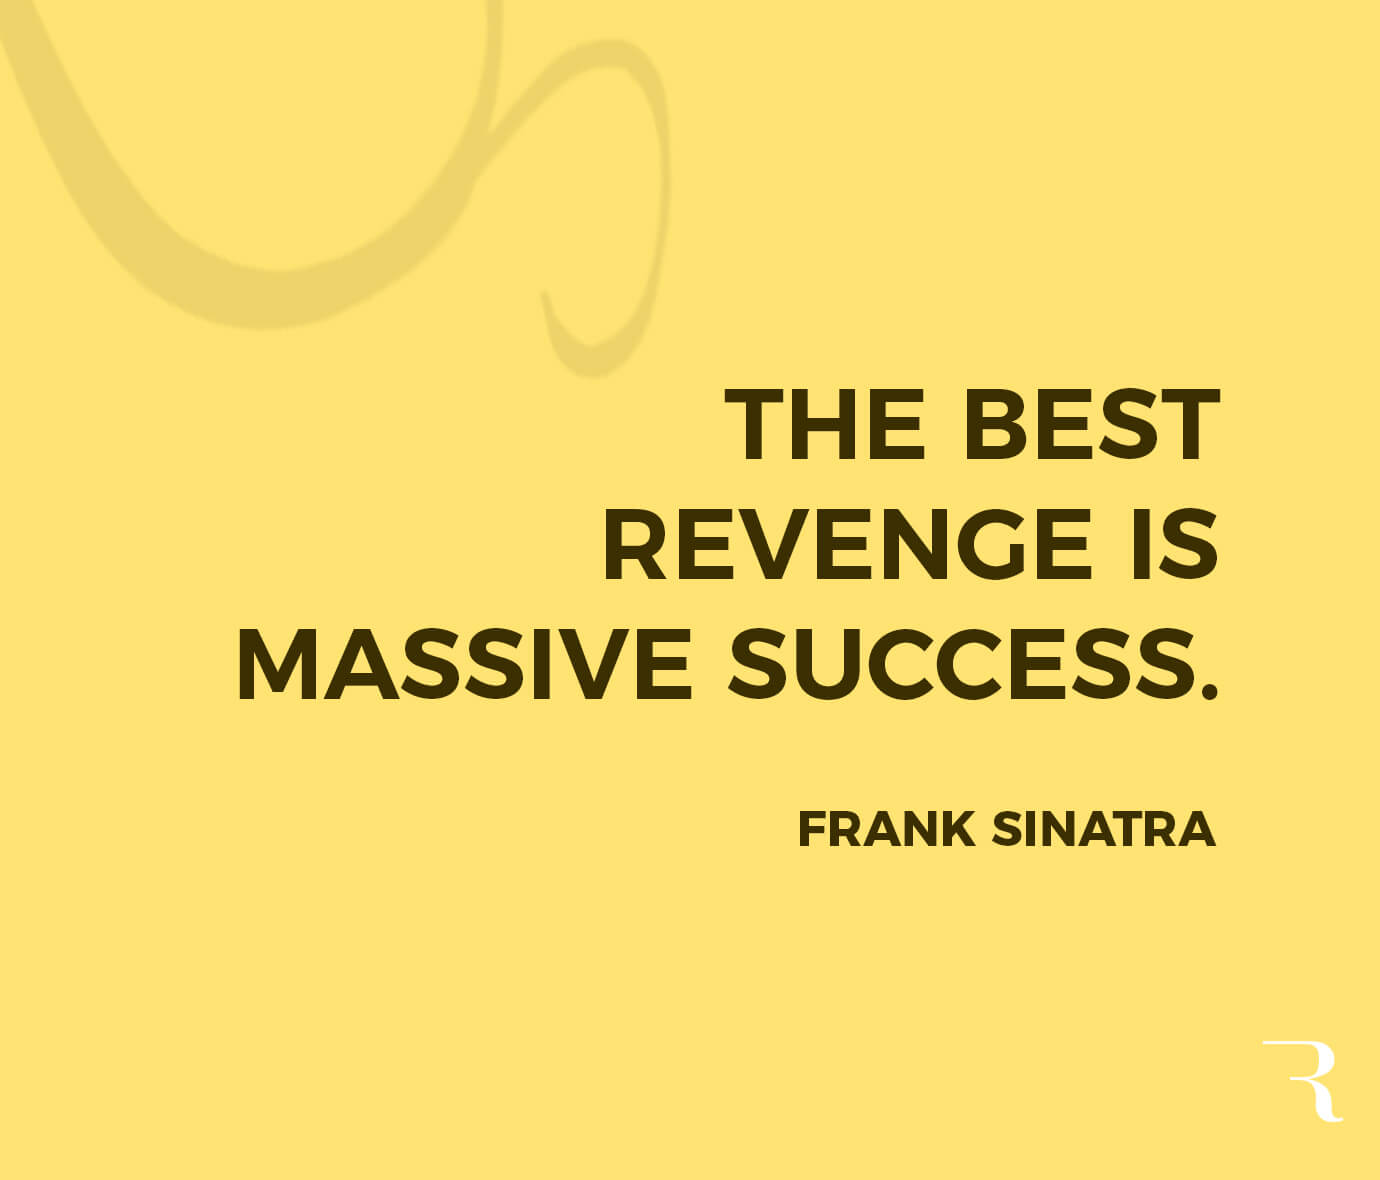 Motivational Quotes: "The best revenge is massive success." 112 Motivational Quotes to Be a Better Entrepreneur